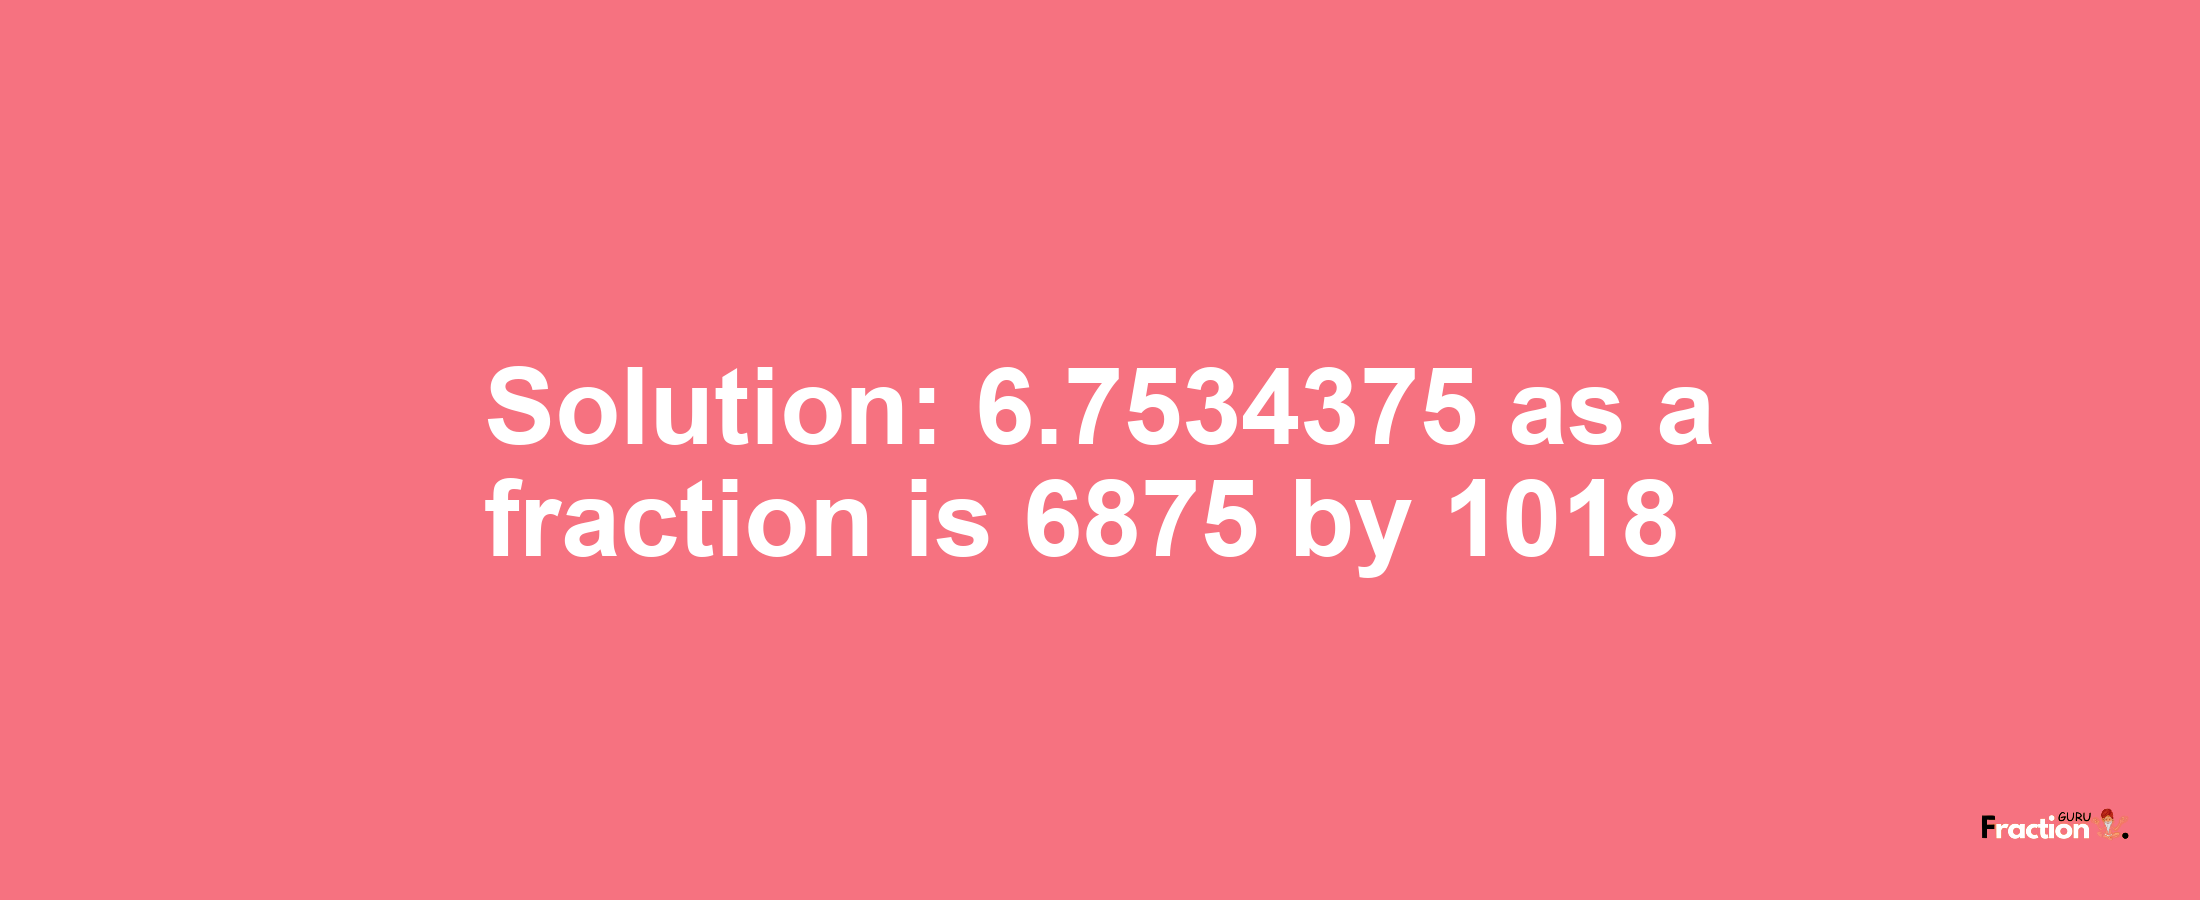 Solution:6.7534375 as a fraction is 6875/1018